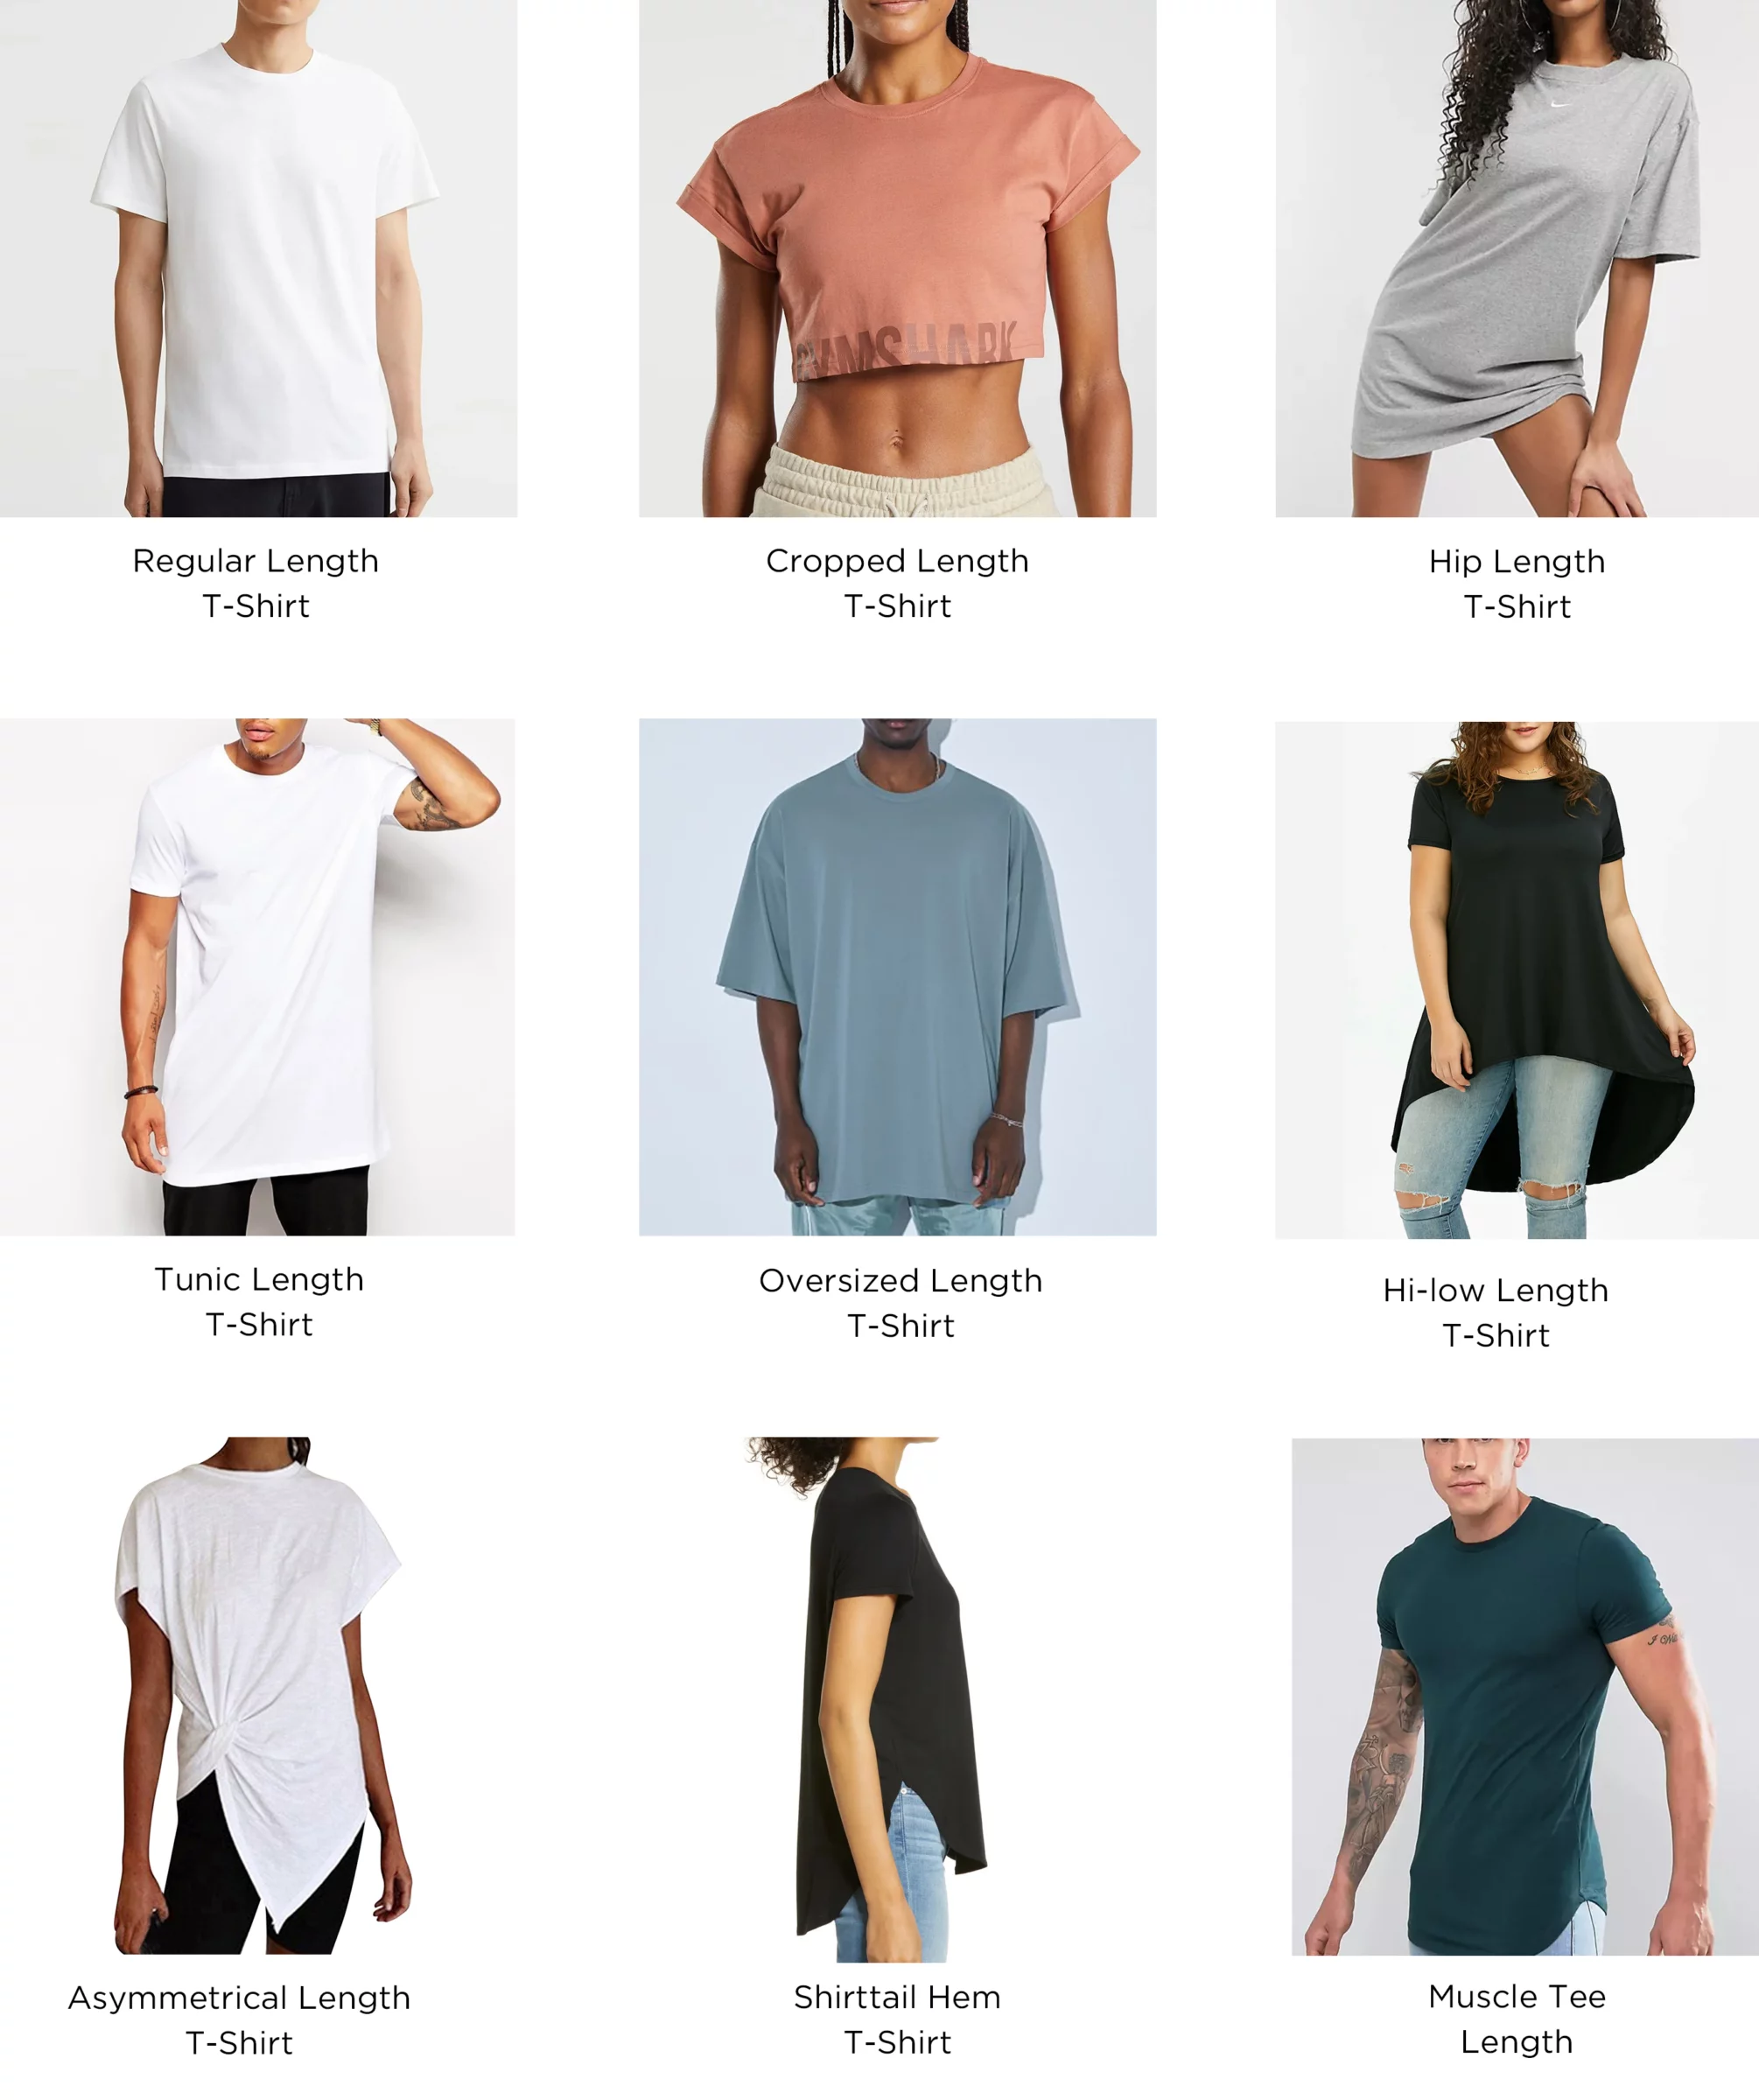 types of t shirts length